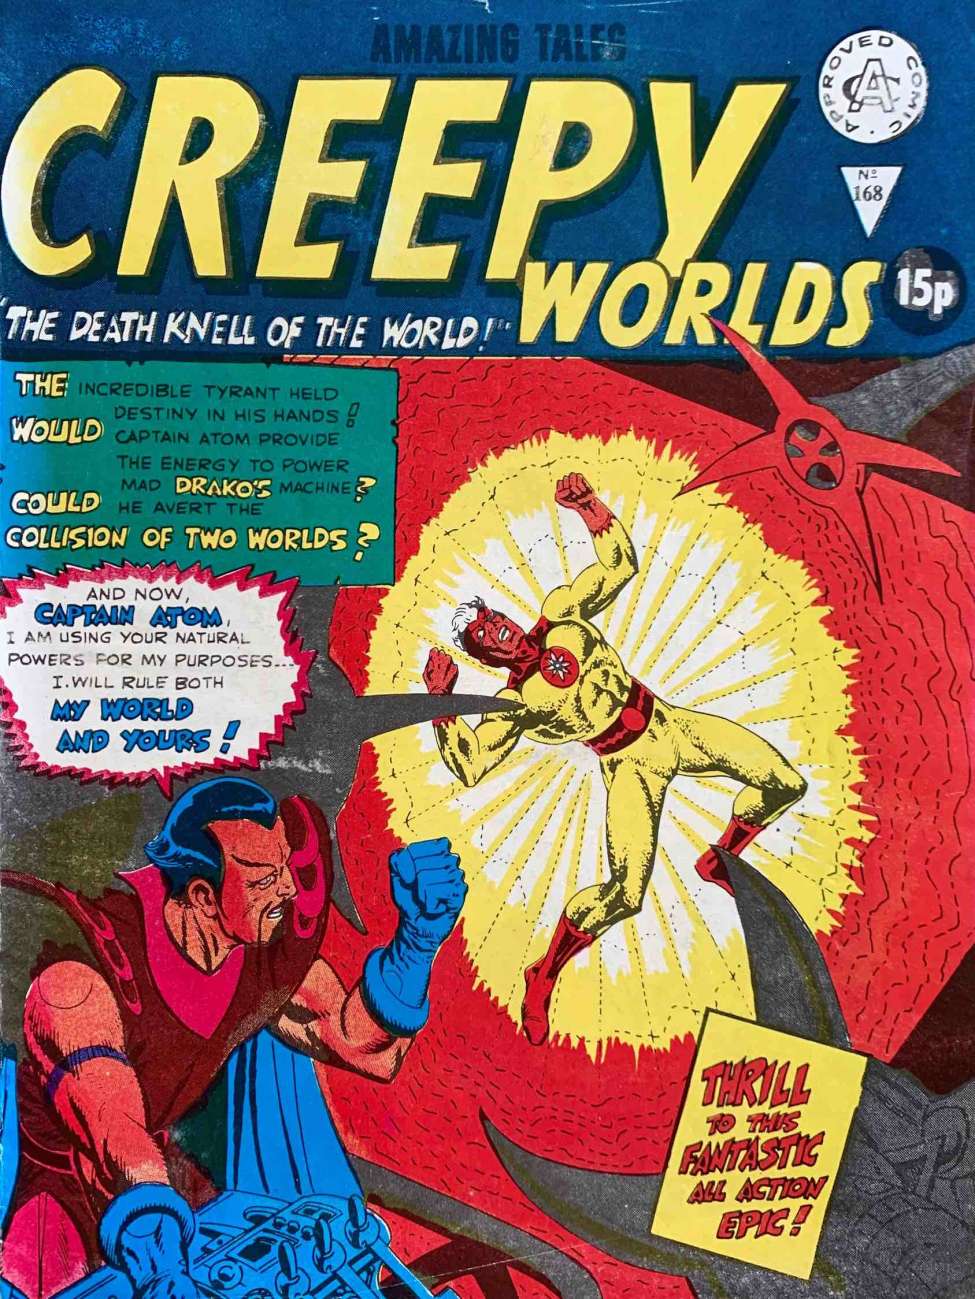 Book Cover For Creepy Worlds 168